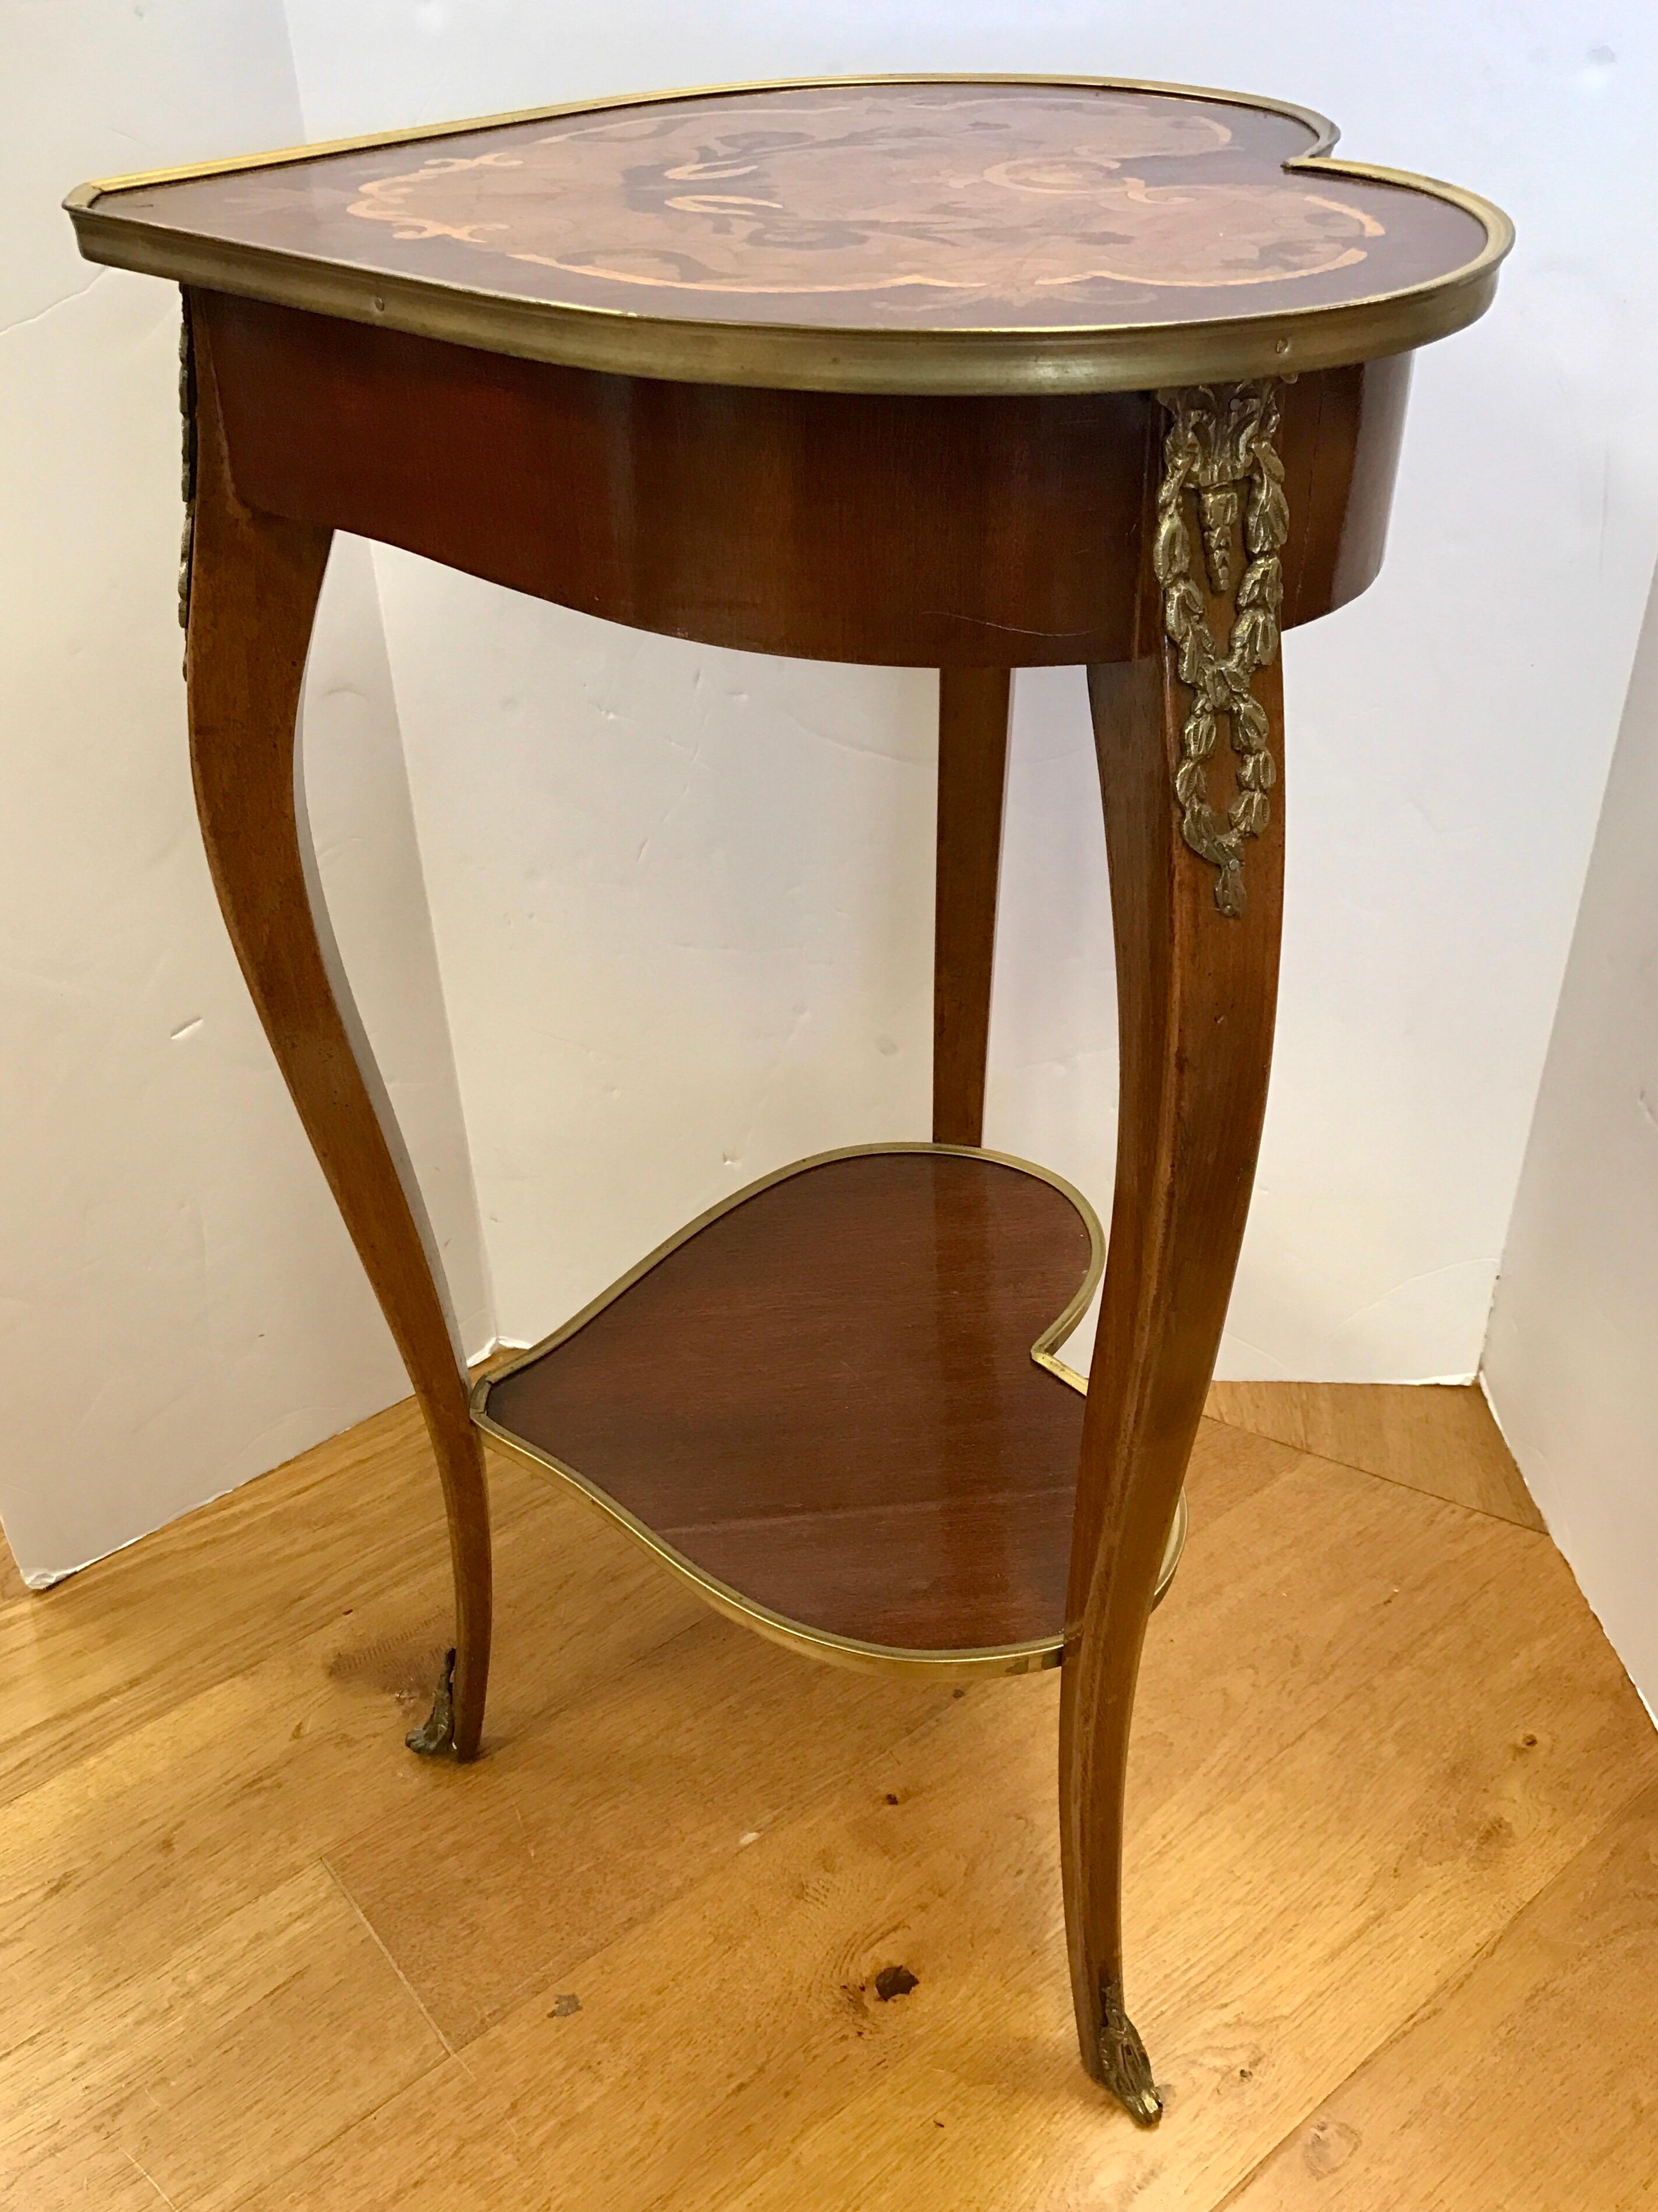 Small in scale but a giant in terms of style, this Louis XV heart shaped table has two tiers and marquetry throughout as well as bronze ormolu.